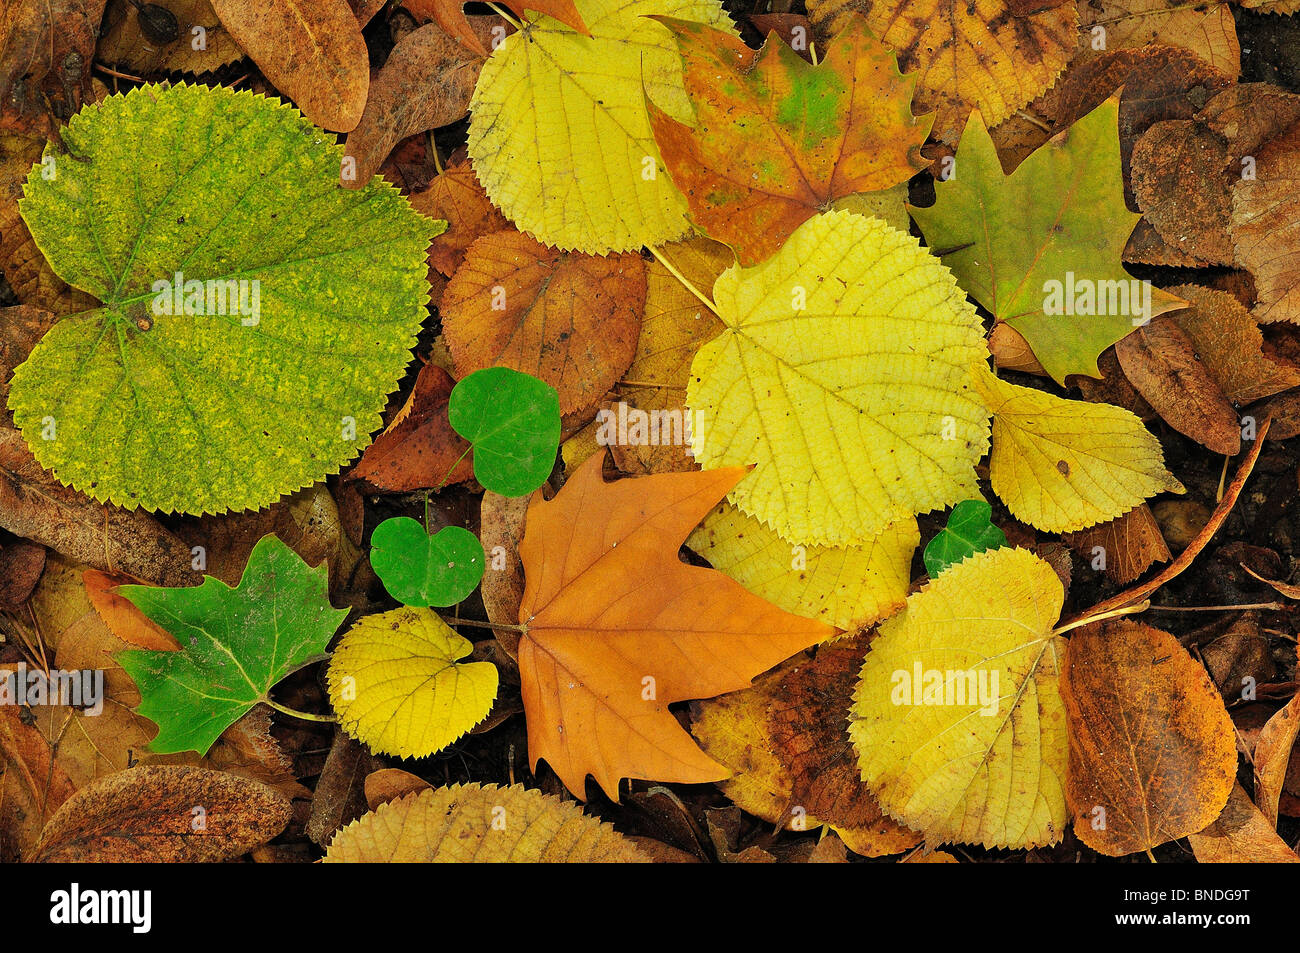 Autumn composition with fallen. Stock Photo